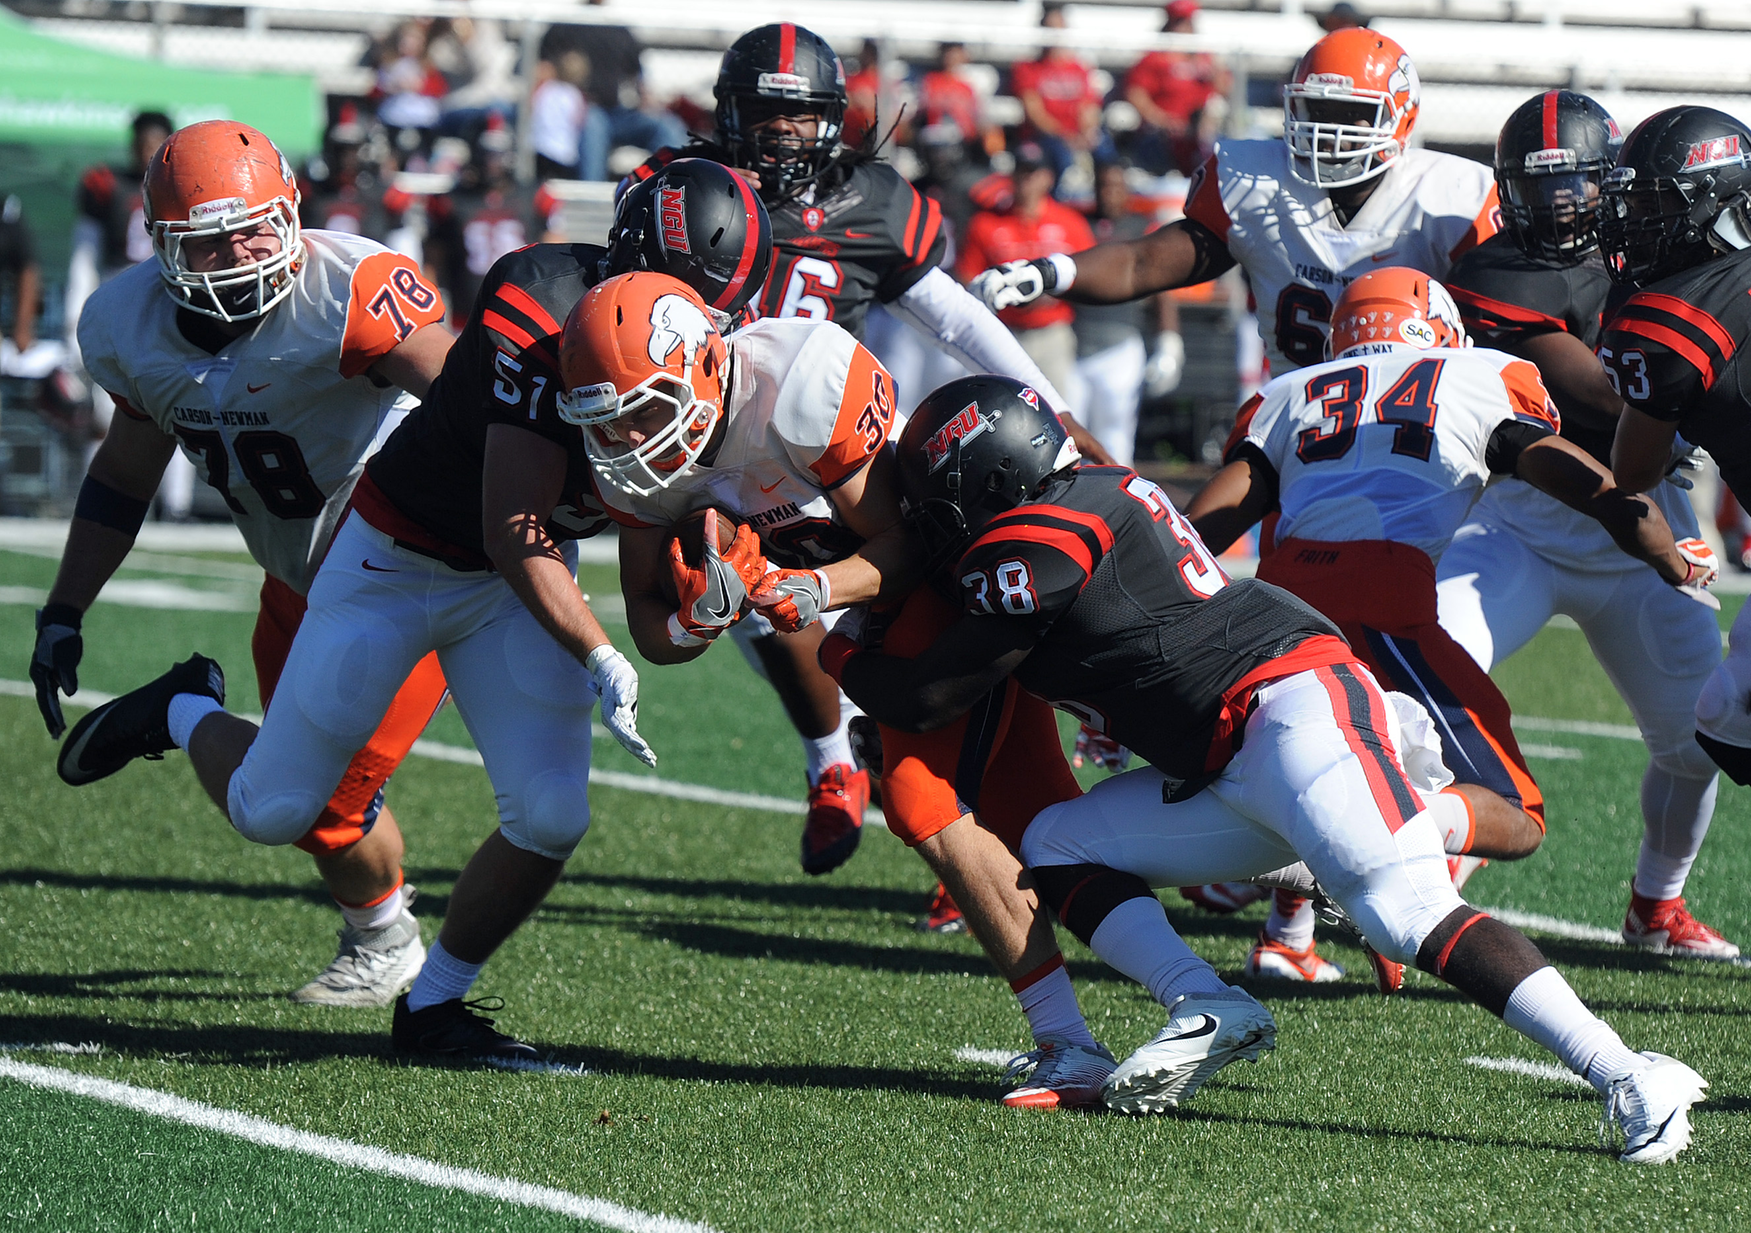 Carson-Newman welcomes Crusaders to The Creek for Homecoming